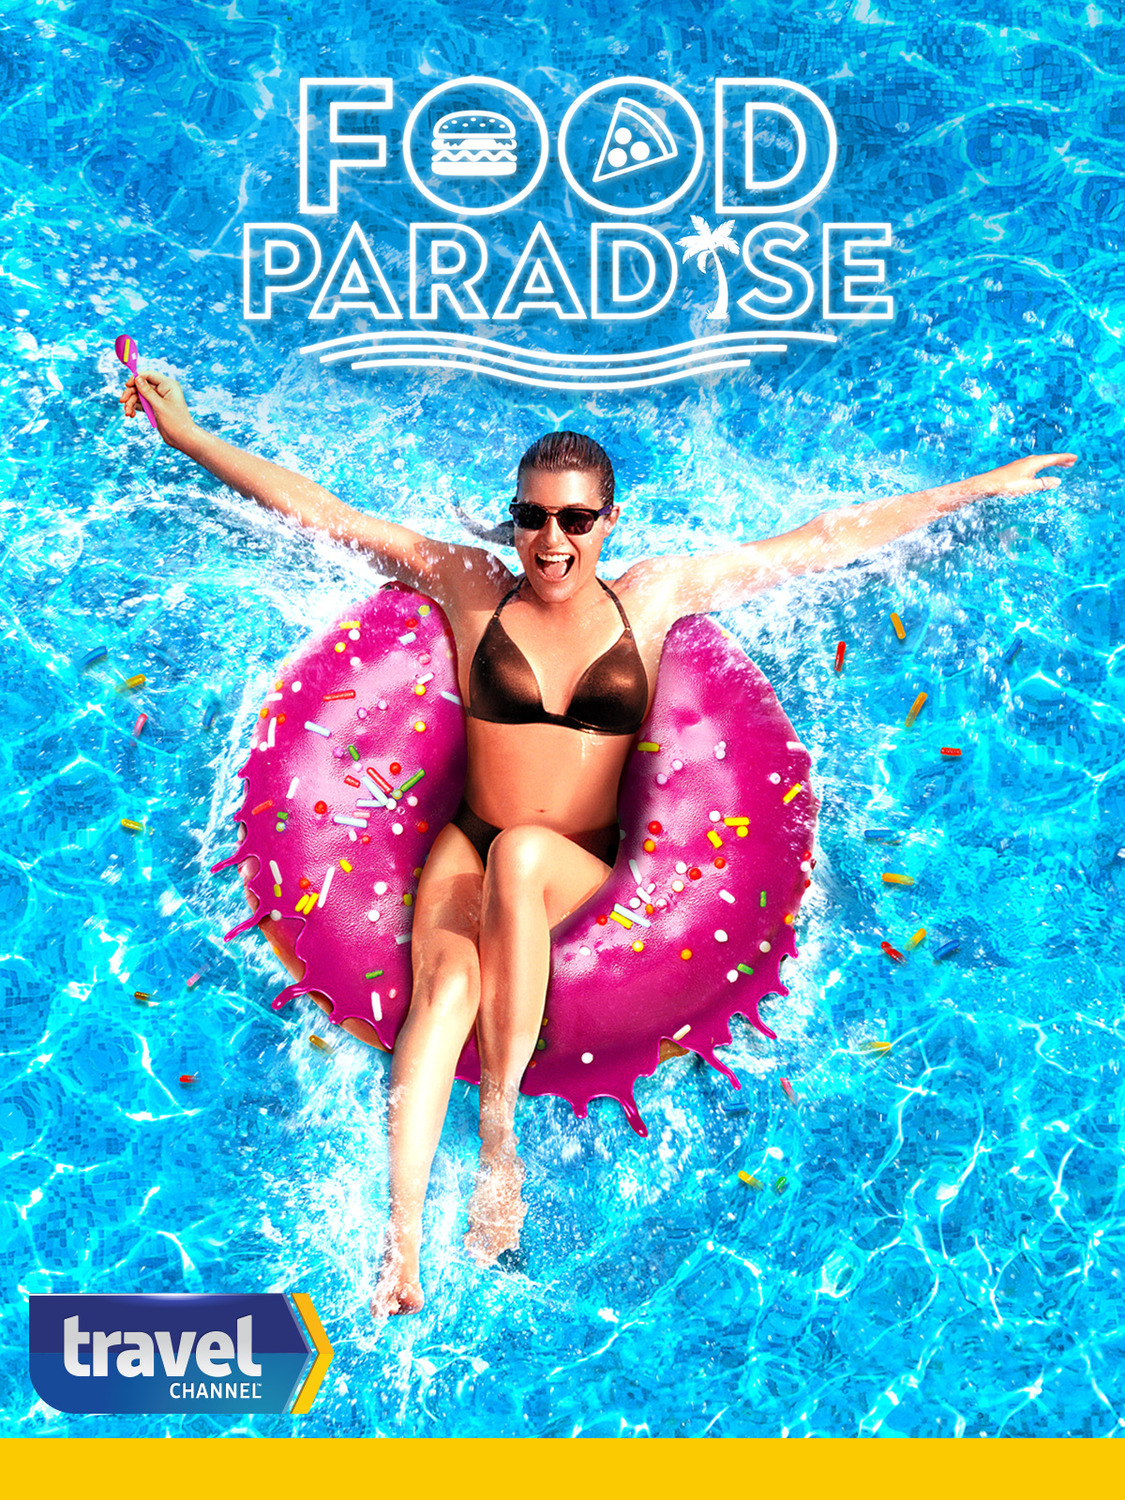 Extra Large TV Poster Image for Food Paradise (#4 of 5)